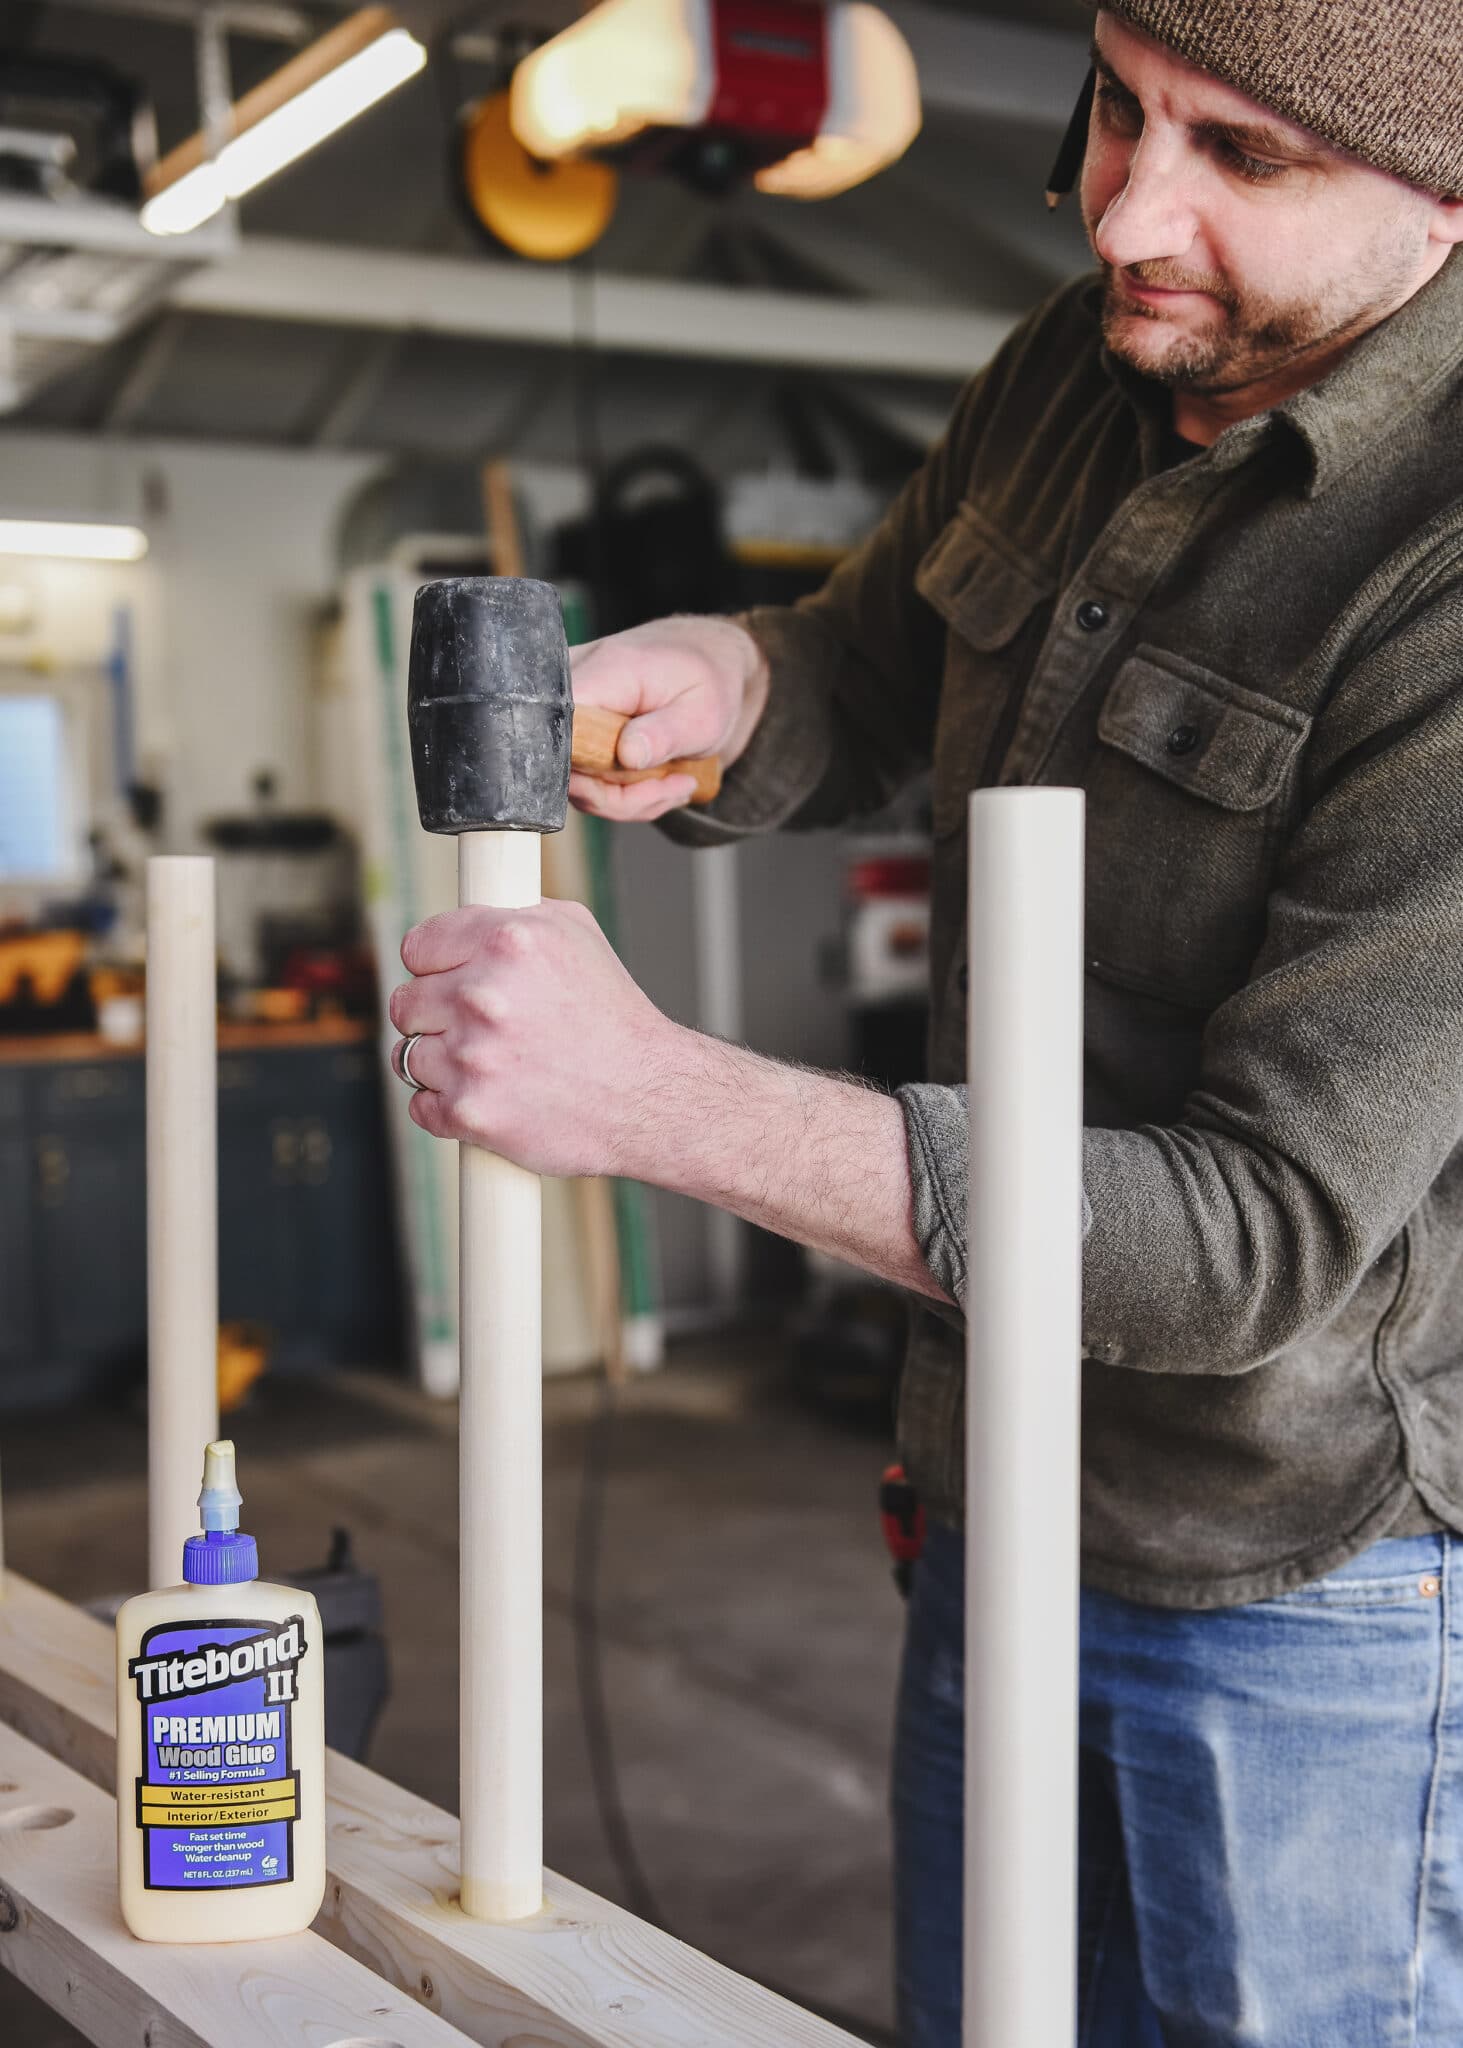 We tapped the rungs into place with a rubber mallet until they were flush with the 2x4 supports. via // yellowbrickhome